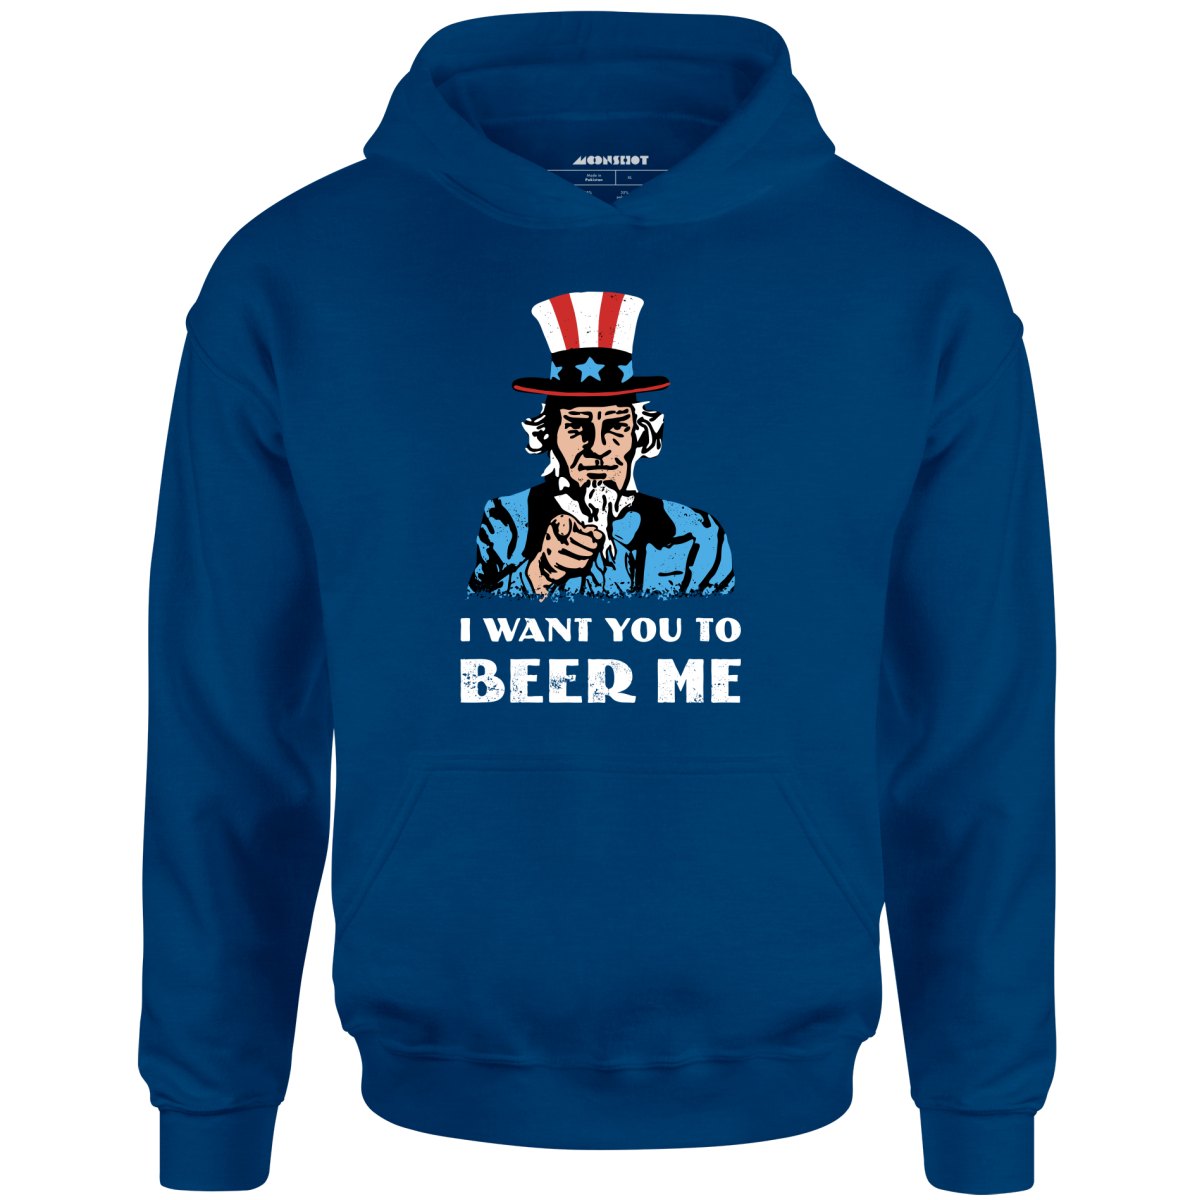 I Want You To Beer Me - Unisex Hoodie